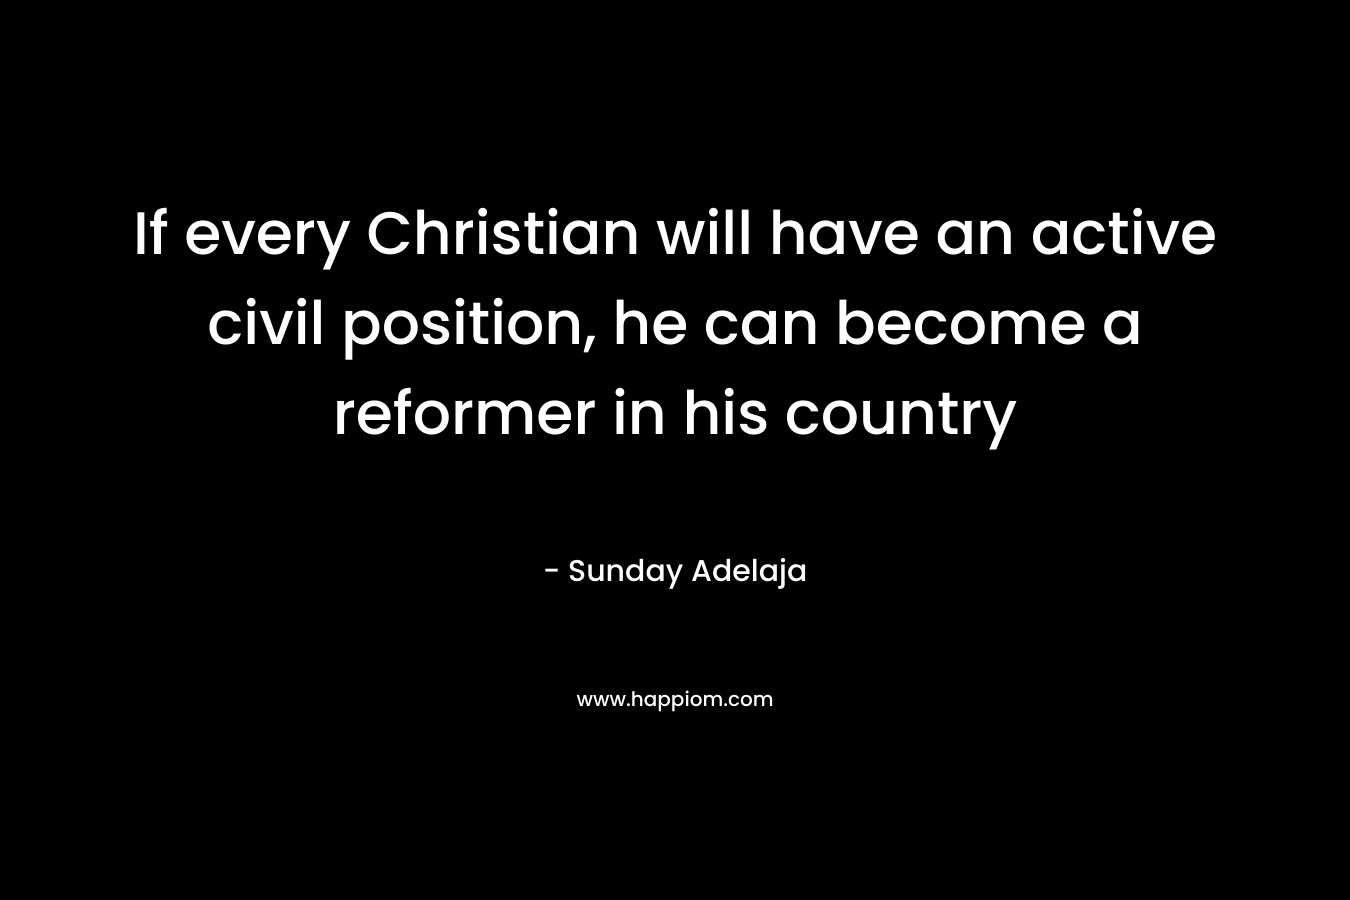 If every Christian will have an active civil position, he can become a reformer in his country